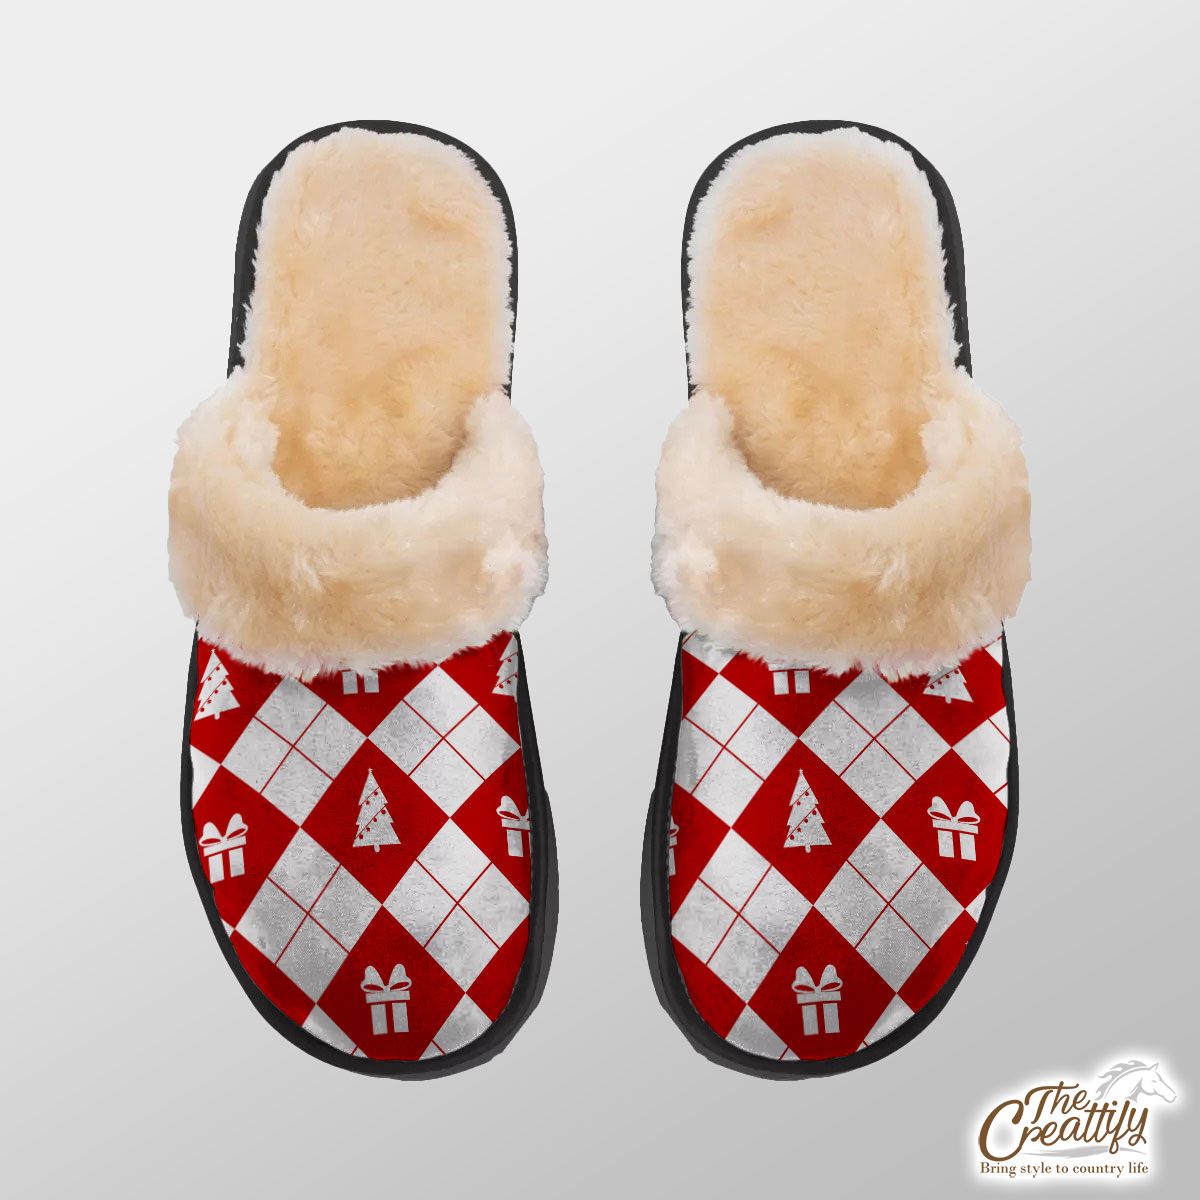 Christmas Gifts And Pine Tree Decorated With Lights On Red And White Background Home Plush Slippers